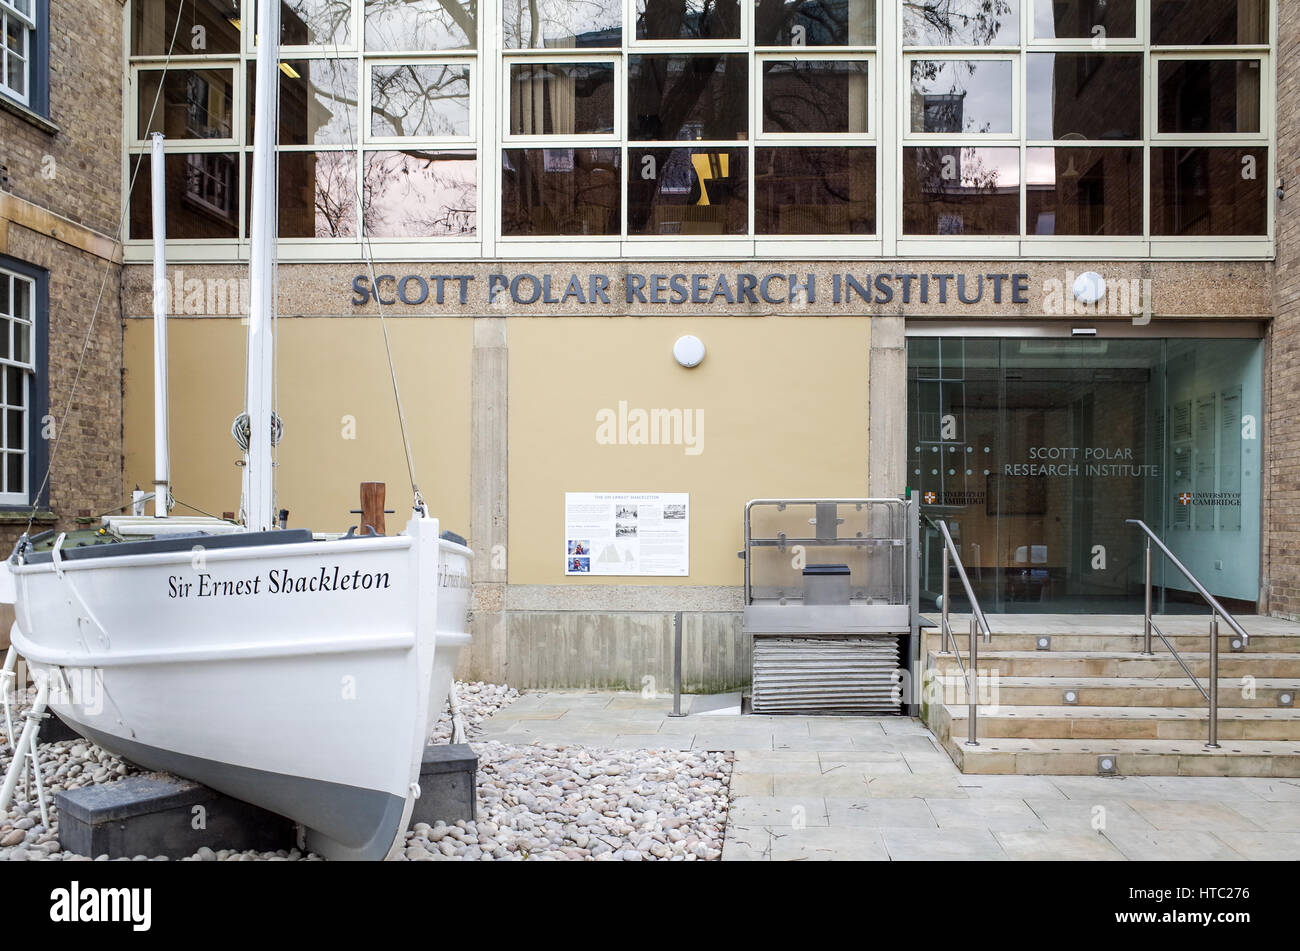 Entrance to the Scott Polar Research Institute in Cambridge. Part of the University of Cambridge it contains a Polar Exploration Museum. Stock Photo